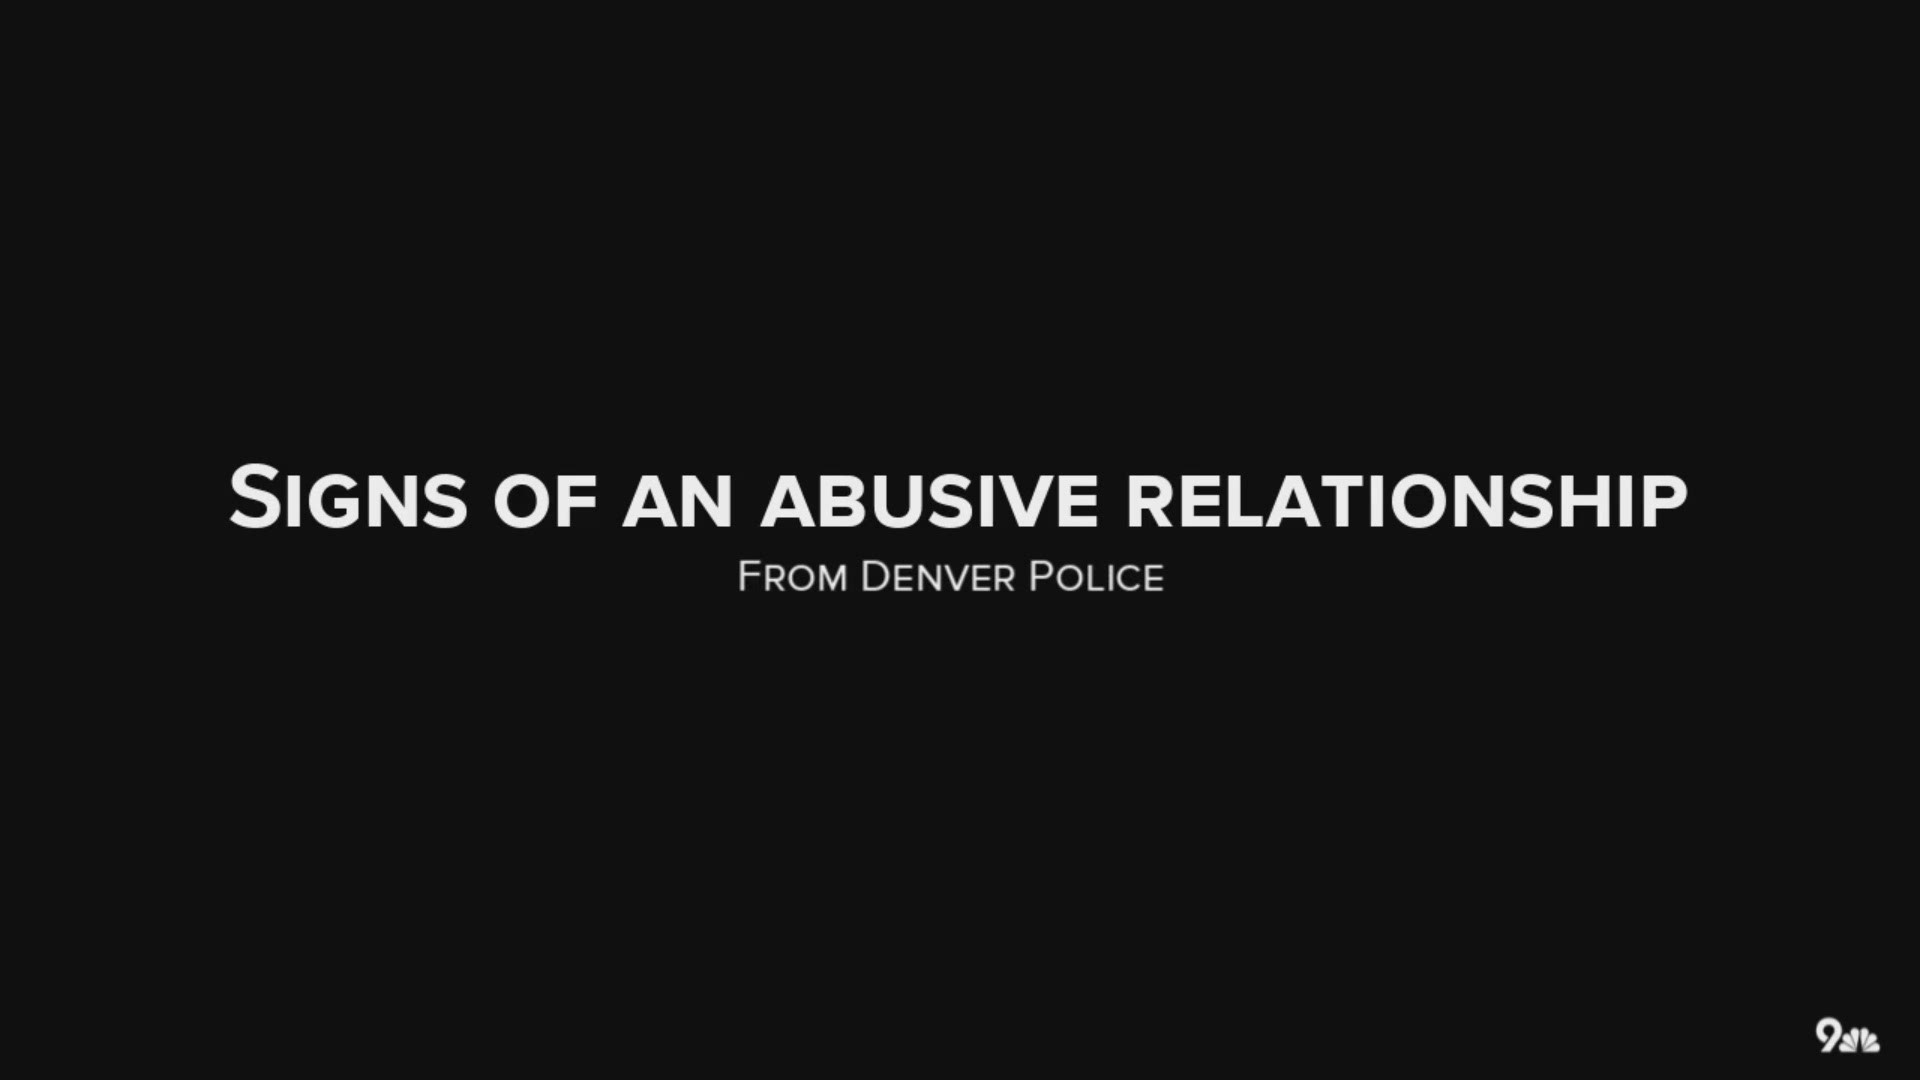 No one should suffer abuse from a loved one, but if you are, many people and organizations are here to help.